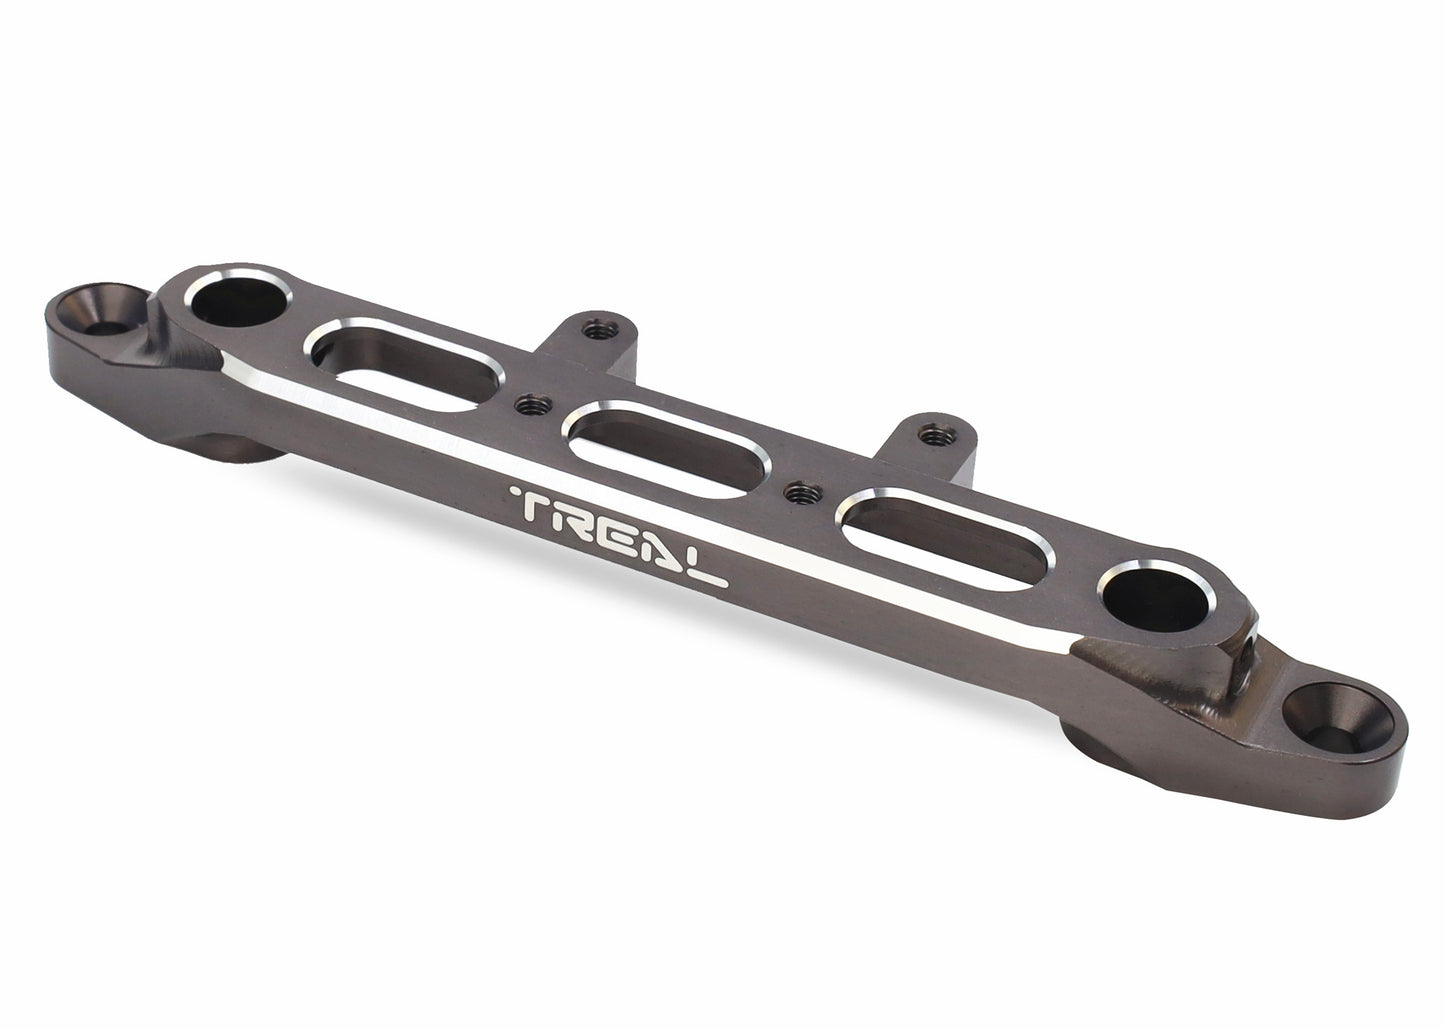 TREAL Aluminum 7075 SCX6 Front Chassis/Shock Tower Brace, Fr Chass Shock Tower Frame Compatible with Axial SCX6 1/6 Jeep